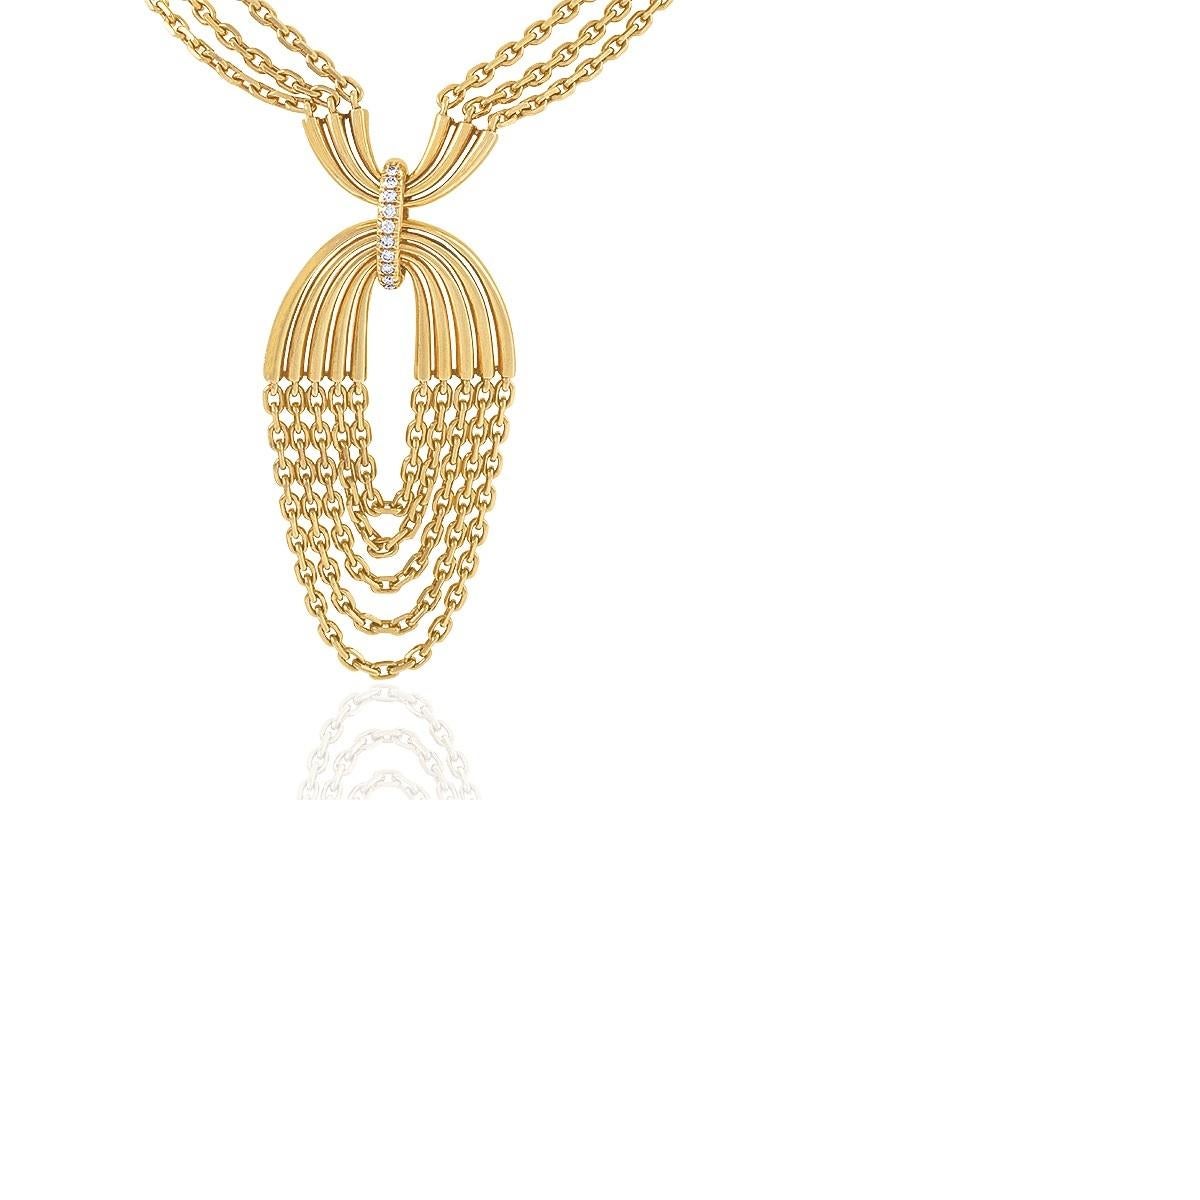 With its contemporary sensibility and soft flexibility, this Van Cleef & Arpels pendant necklace is unmistakably French modern. The dynamic geometric motifs are creatively extended and completed by the draping, flexible swags of trace-link chains,